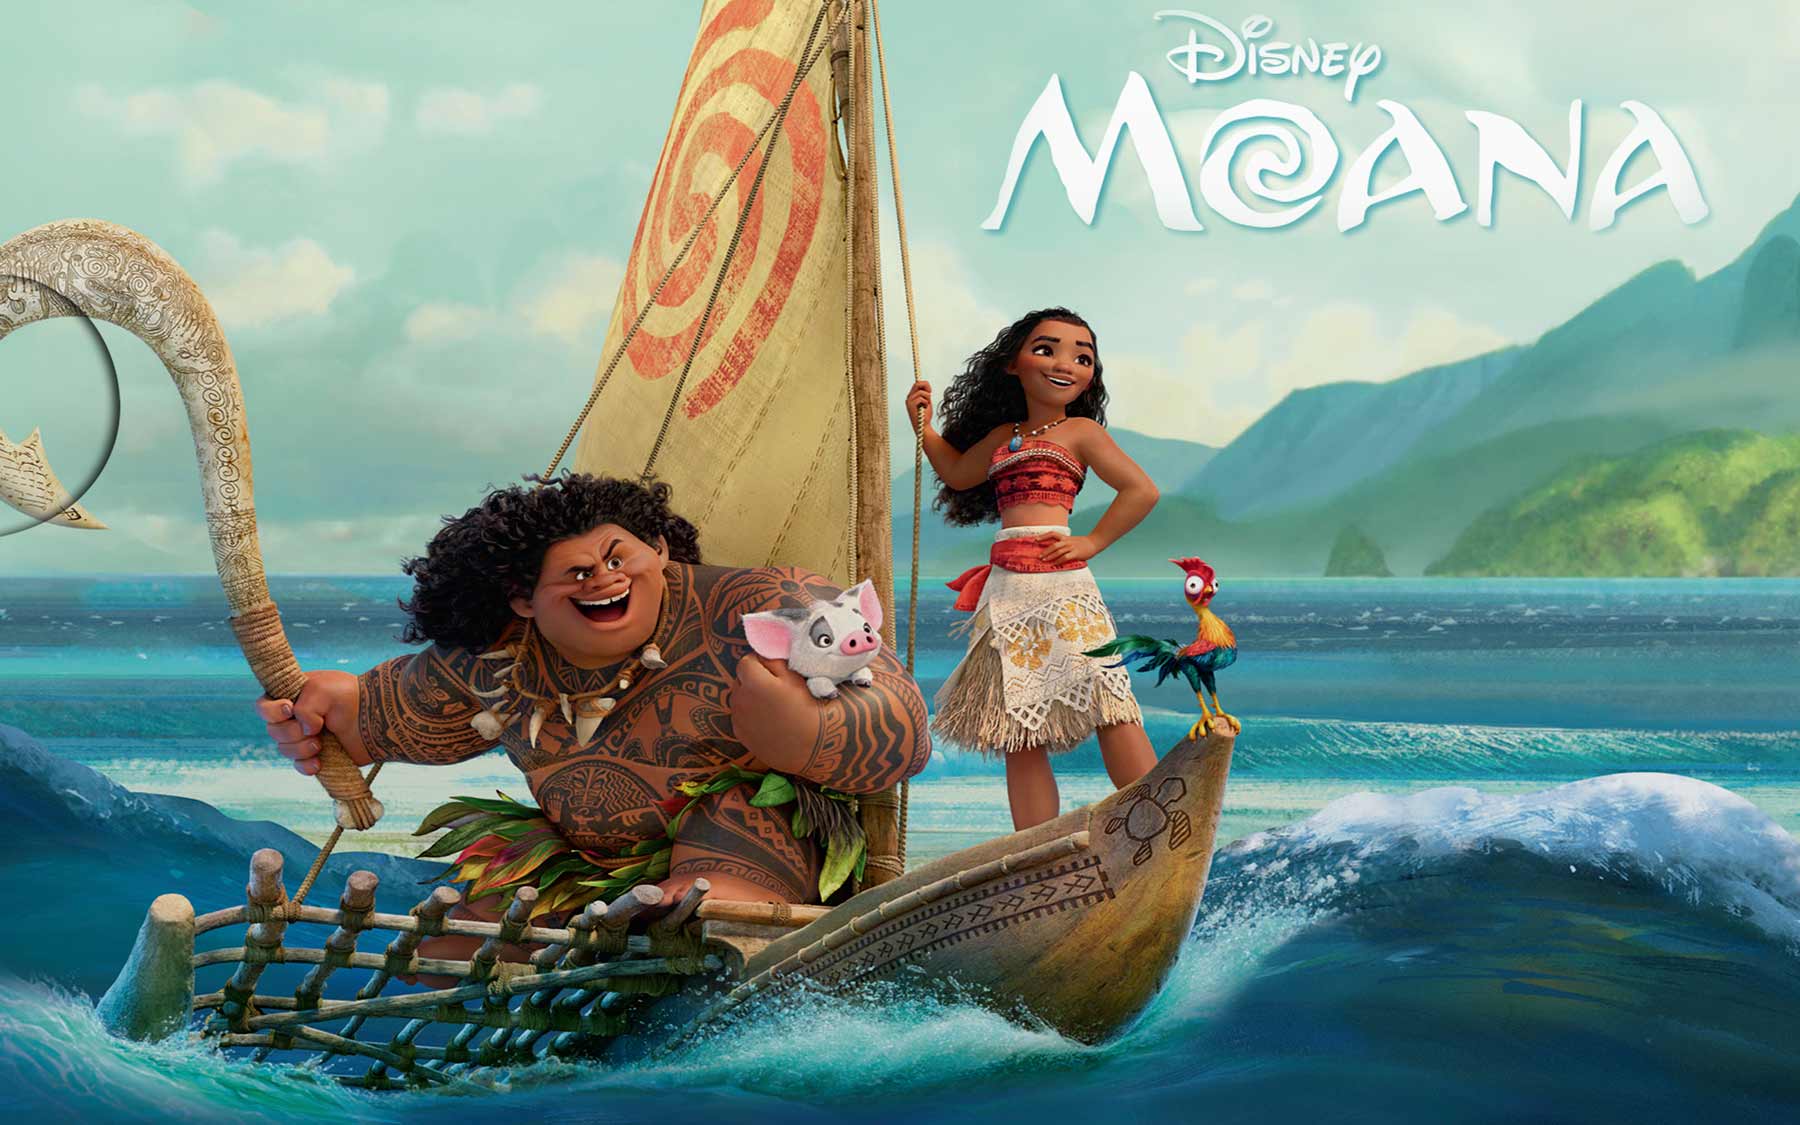 Disney range of silver coins expands to cover Moana, their latest movie